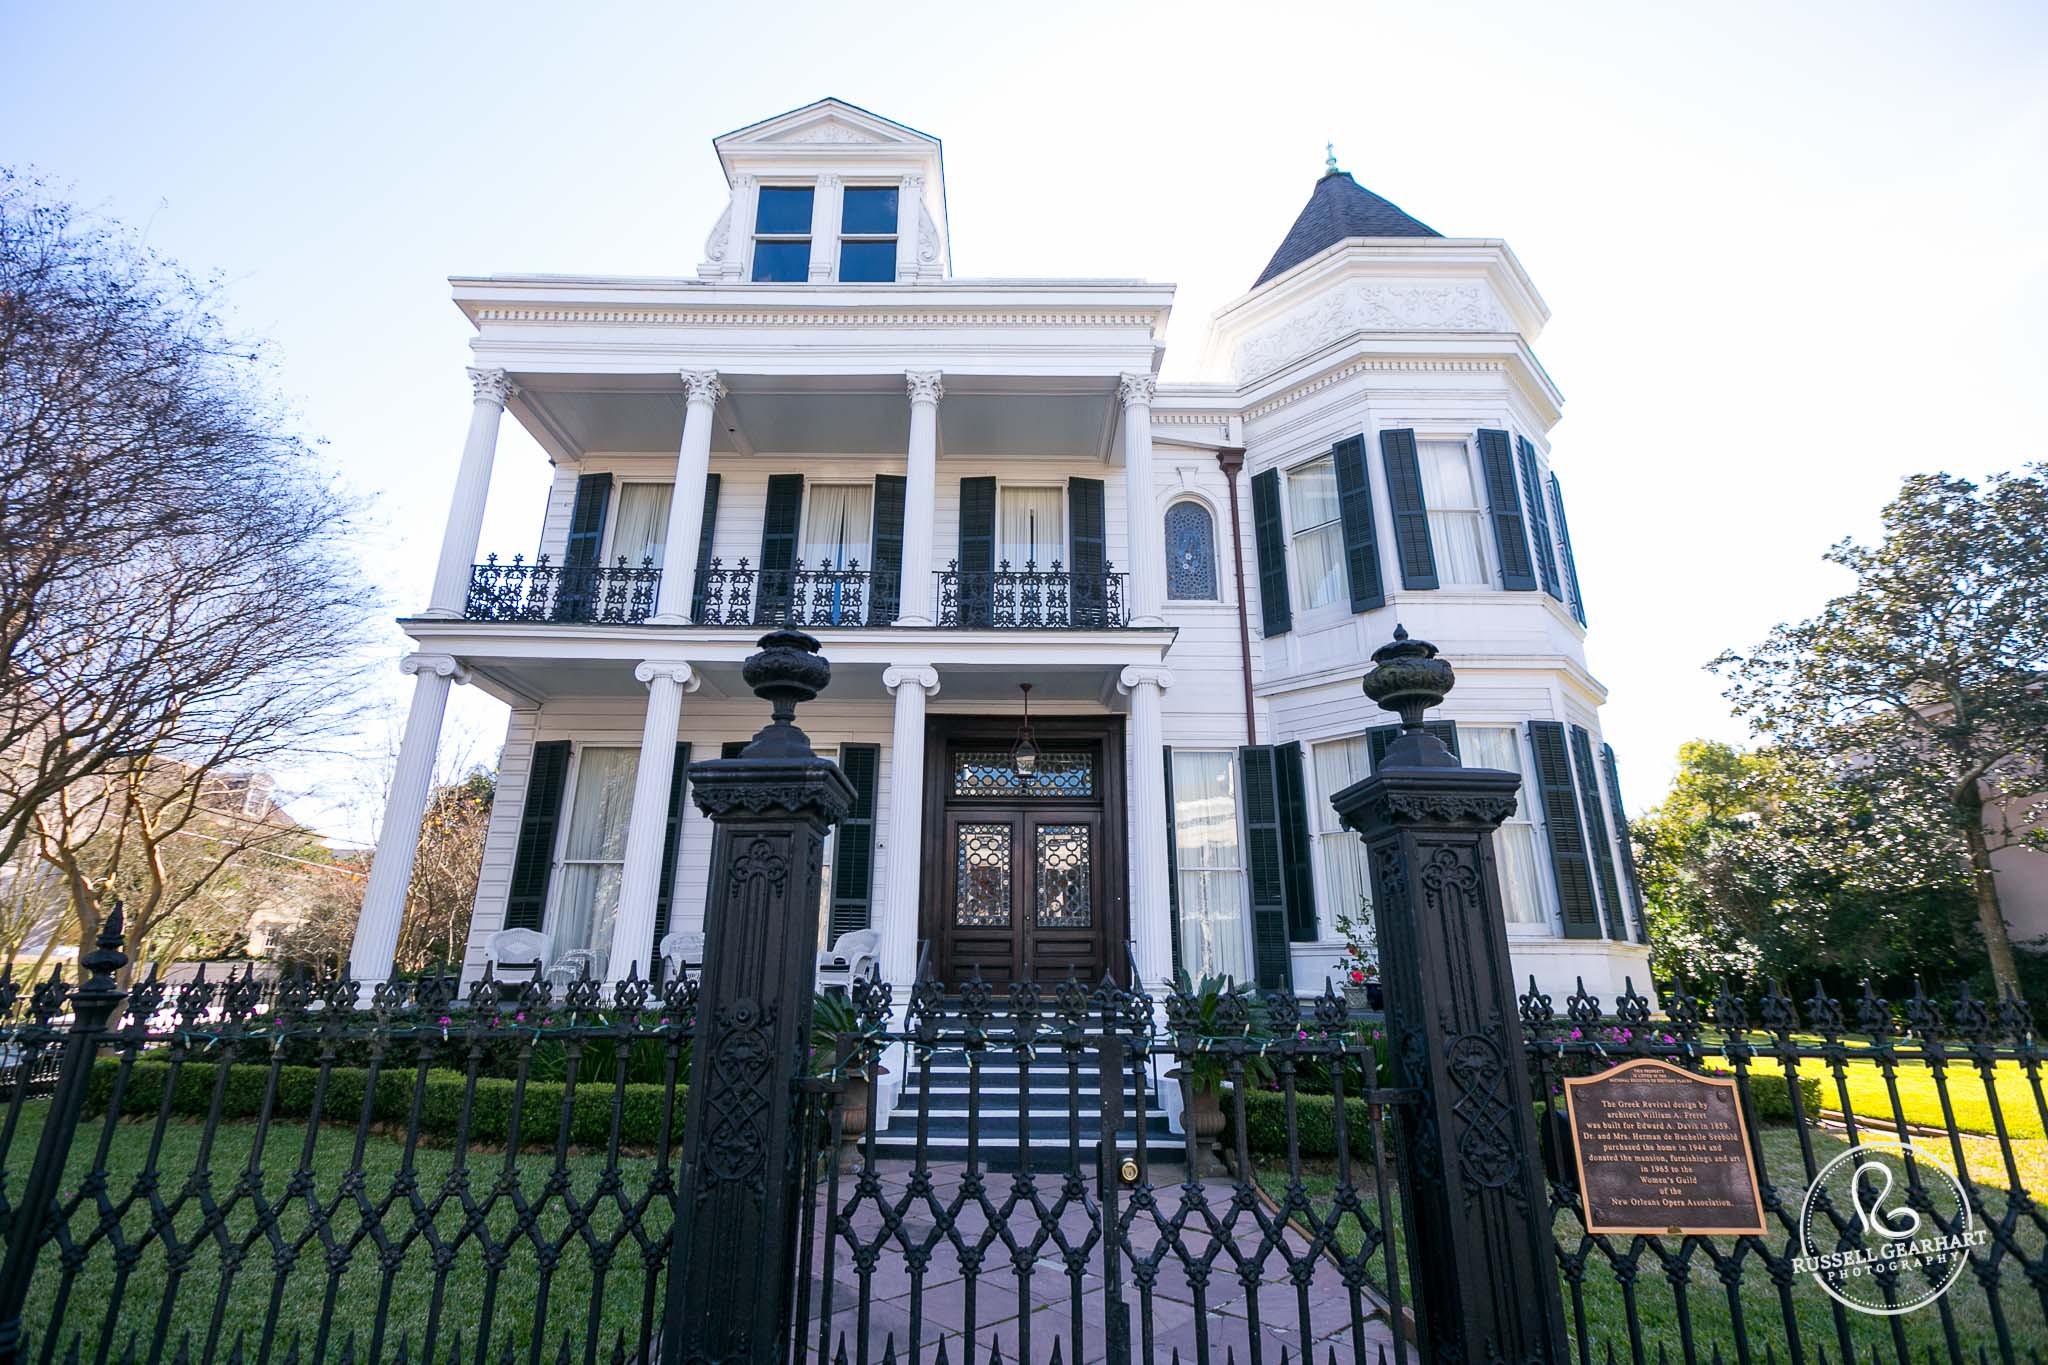 We took a Free Tours By Foot tour of the mansions in the Garden District.